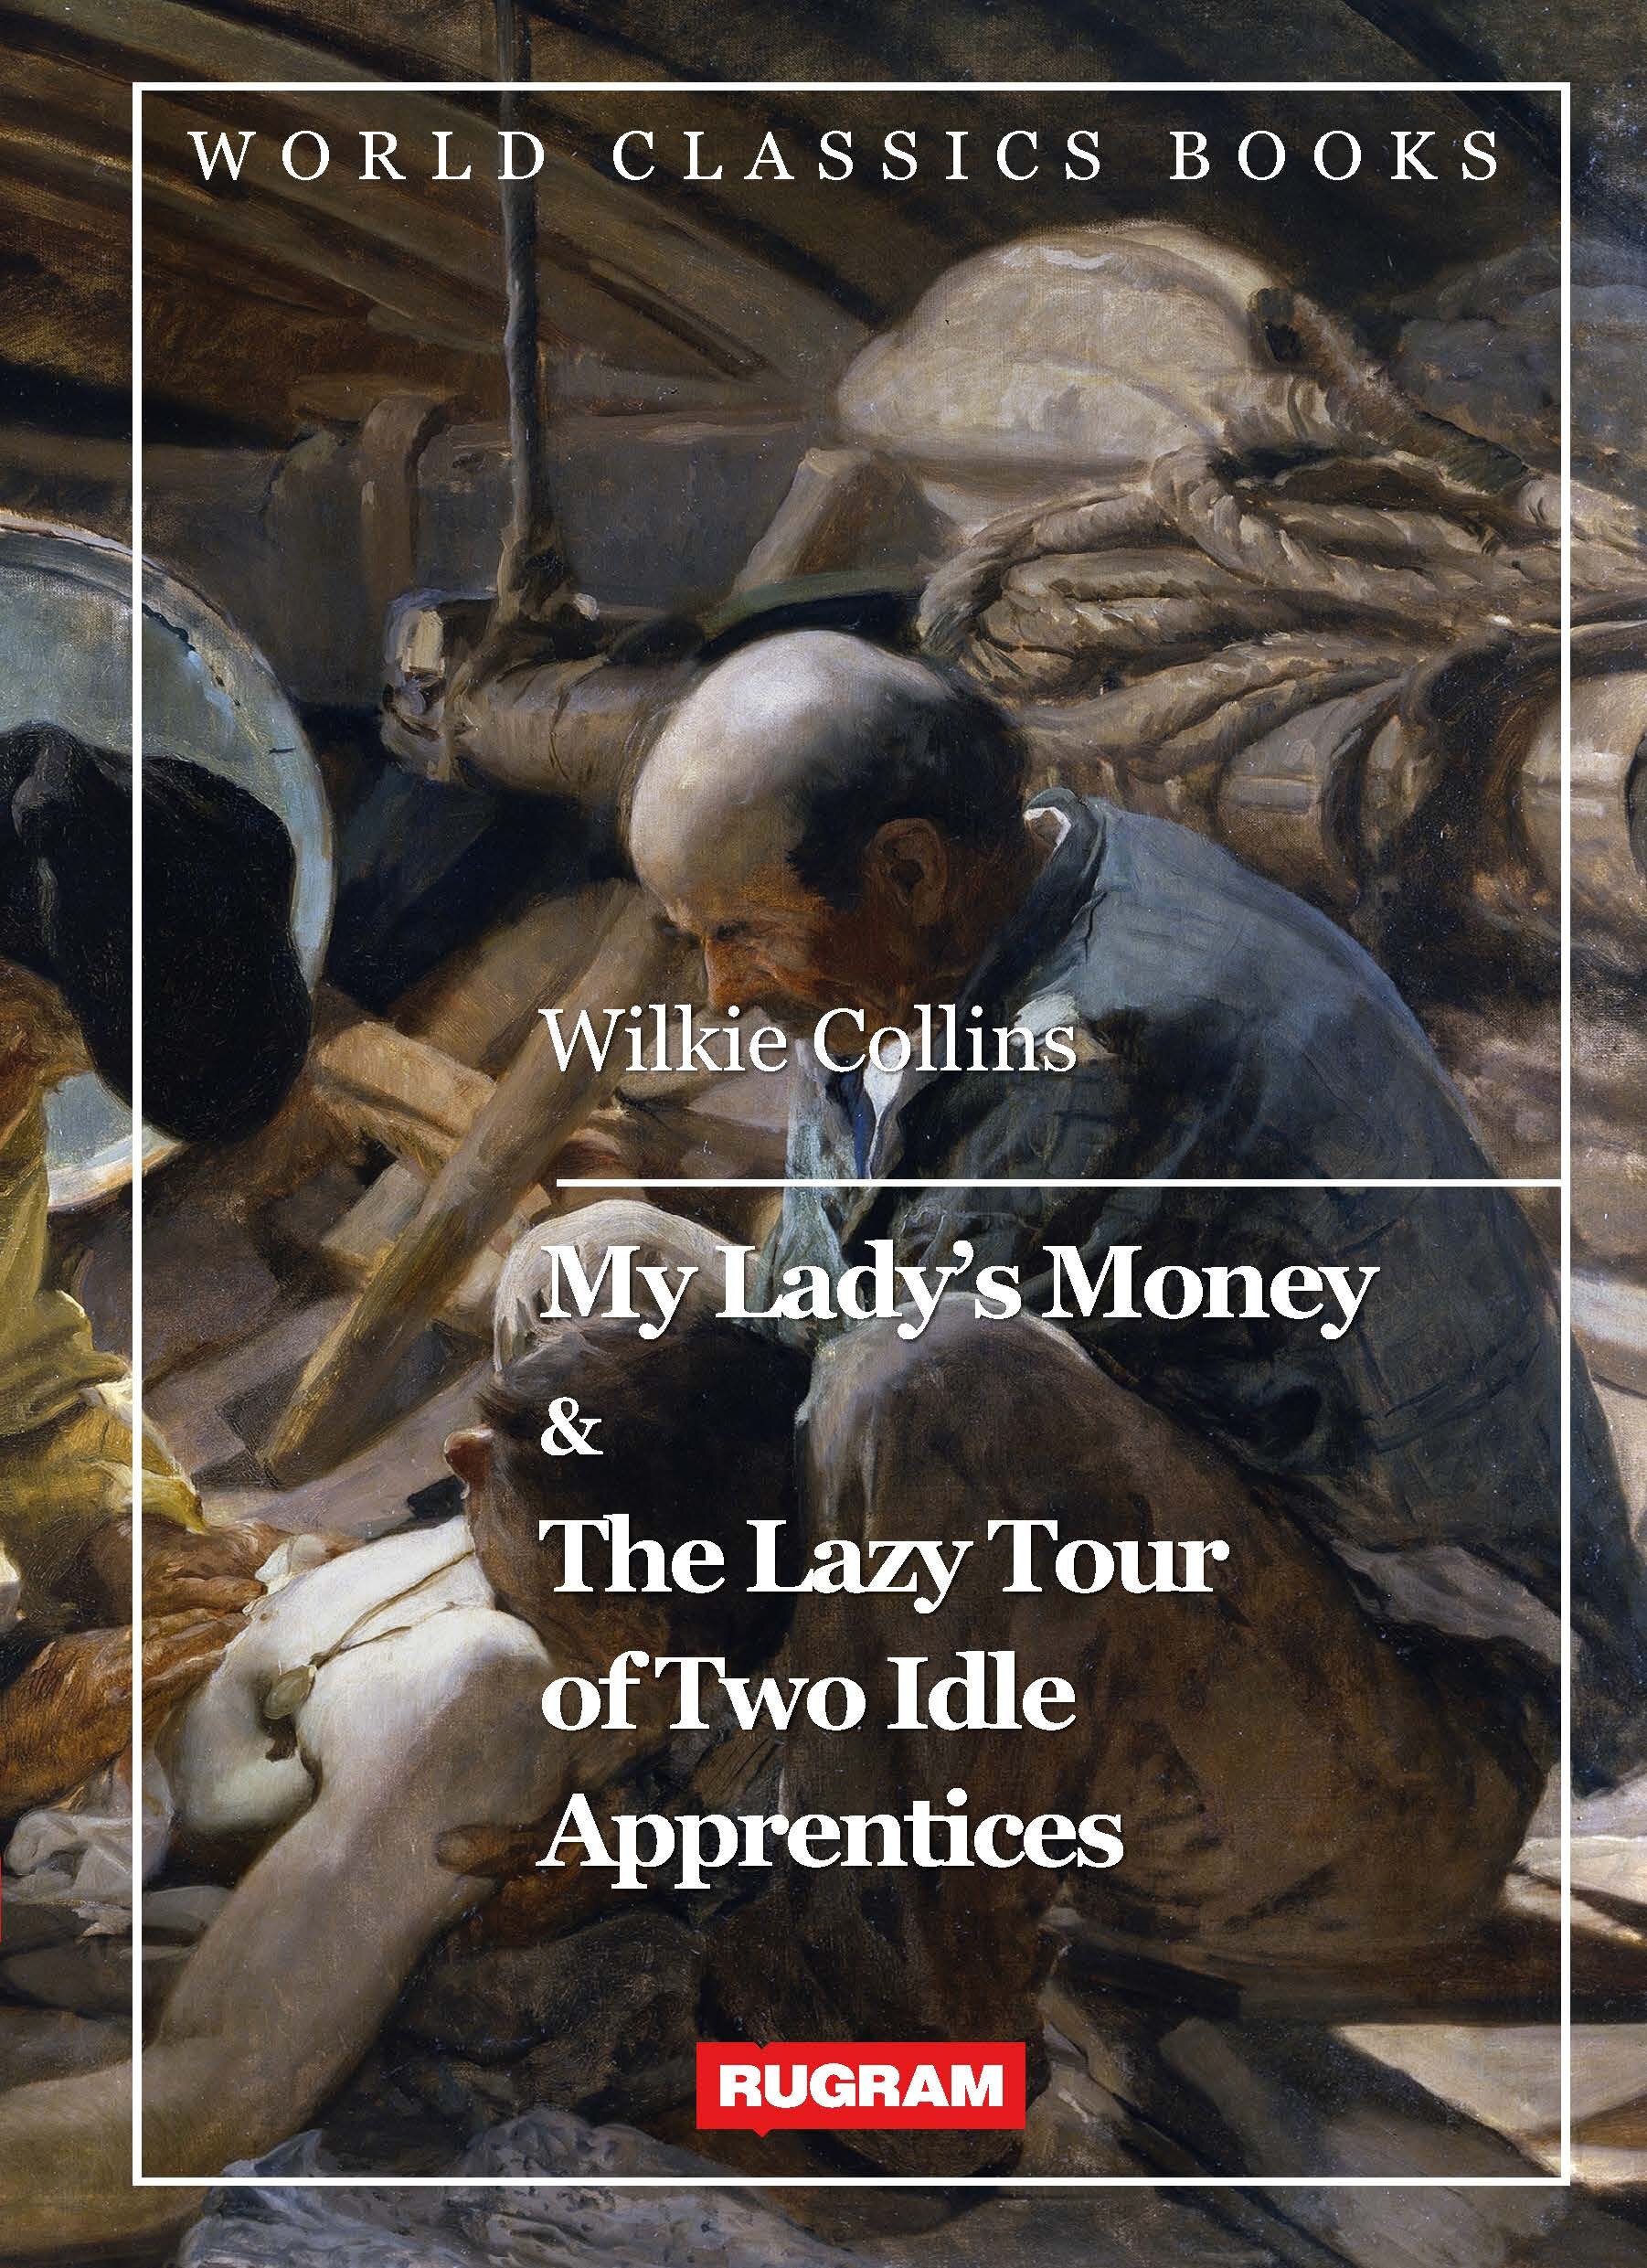 My Lady's Money & The Lazy Tour of Two Idle Apprentices